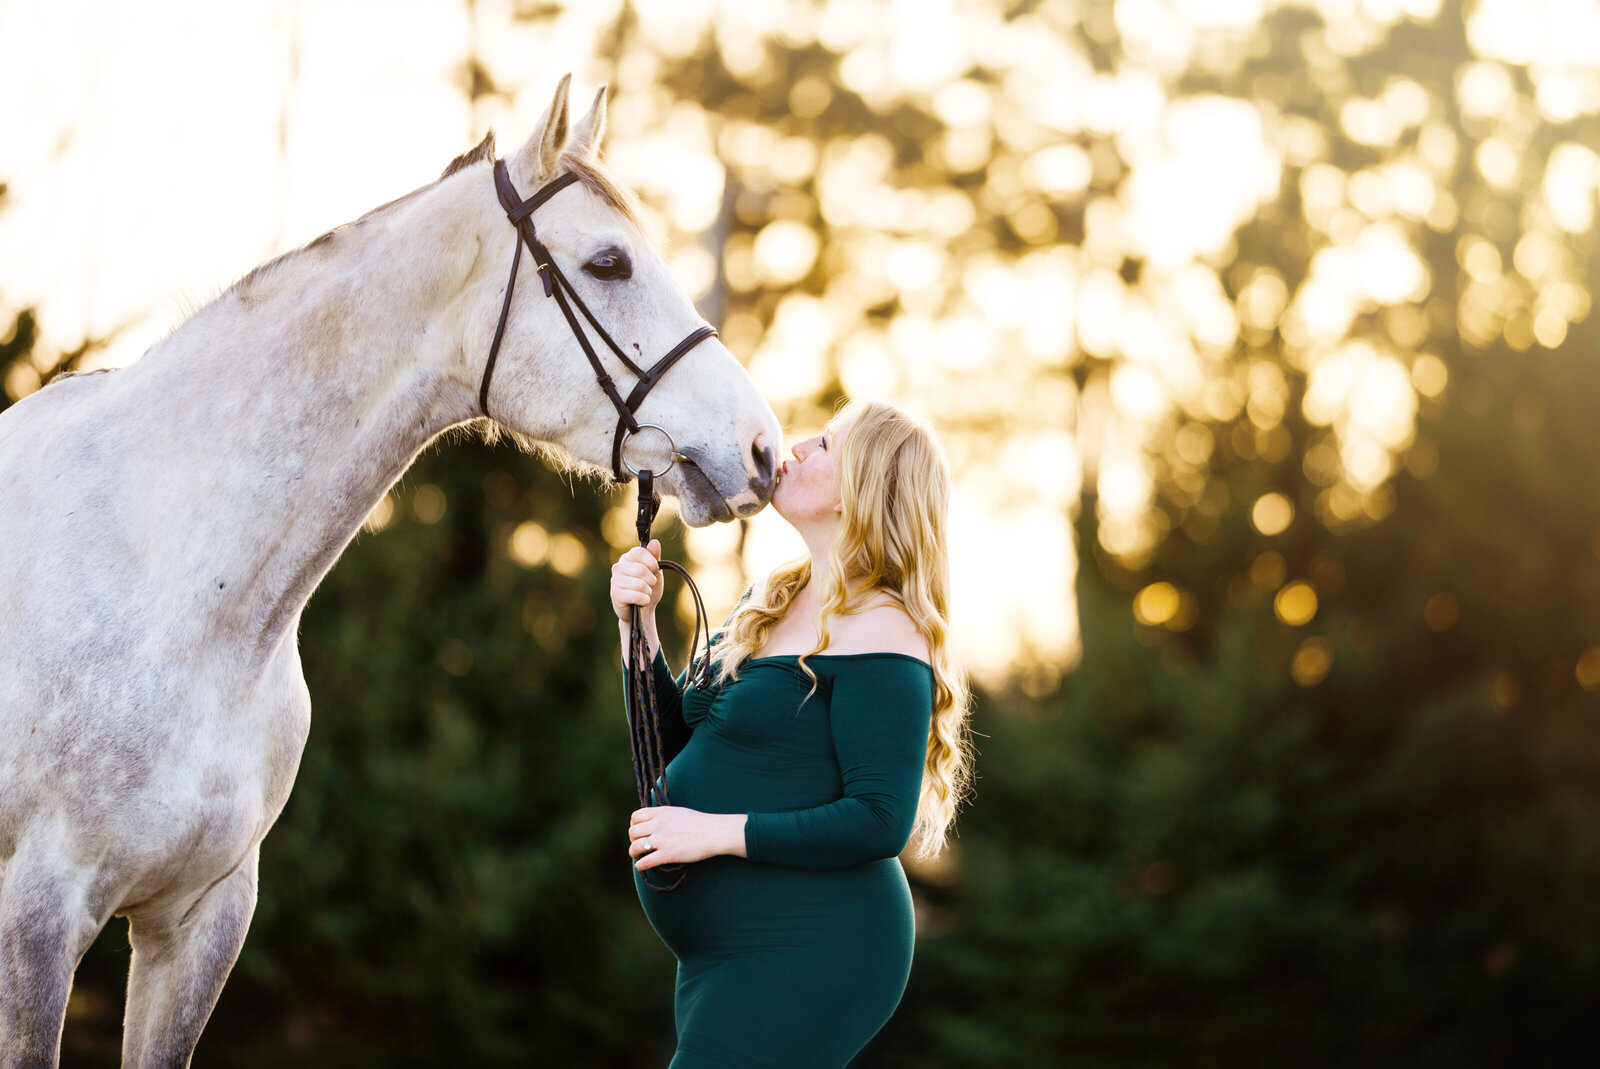 Knoxville TN Equestrian Photographer, Knoxville TN Equine Photographer, Knoxville TN Family Photographer, Farragut TN Equine Photographer, Farragut TN Equestrian Photographer, Farragut TN Photographer, Horses, Farragut TN Horses,  Knoxville TN Horses